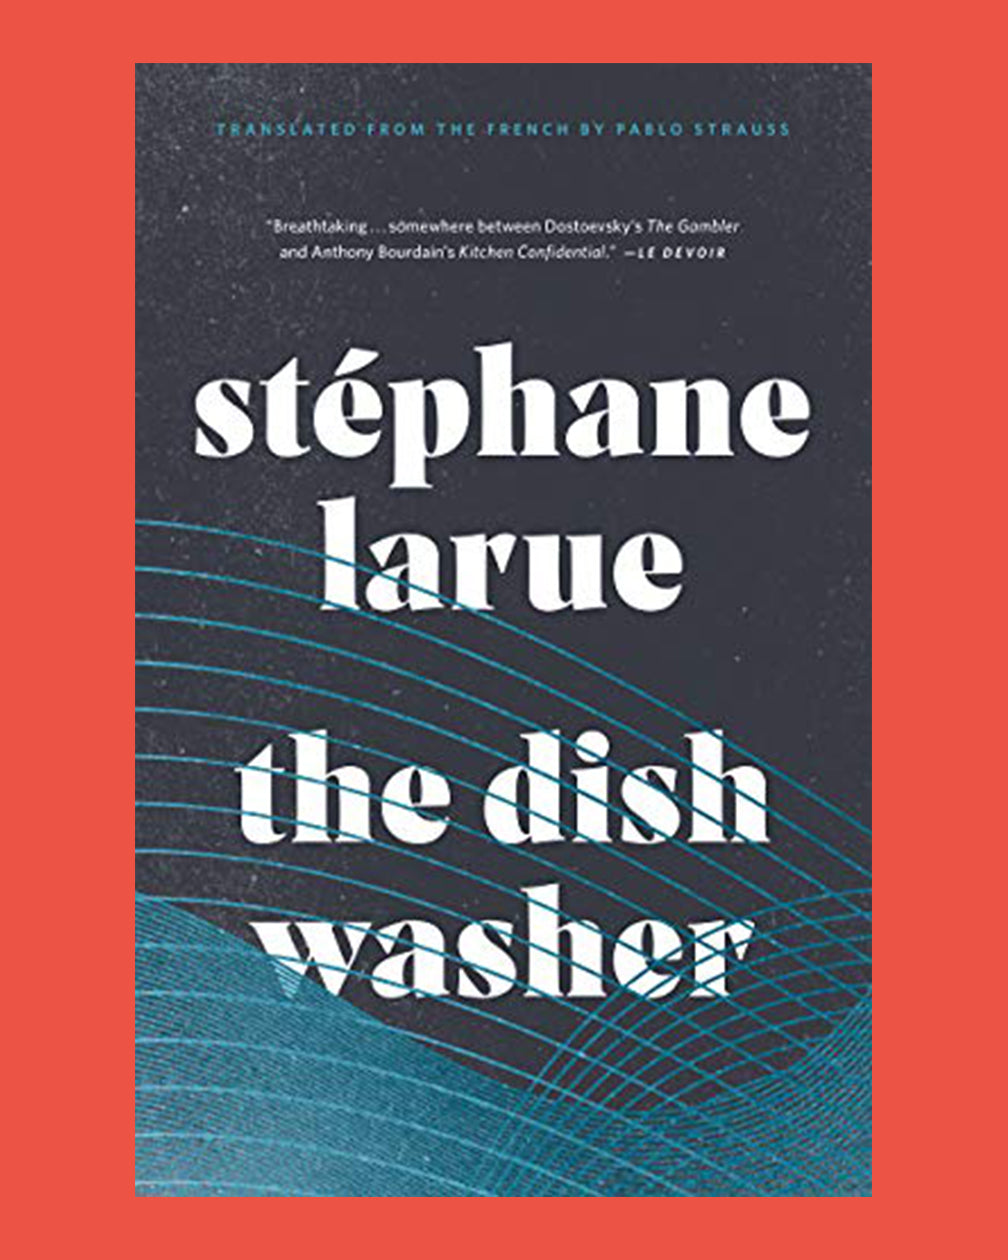 The Dish Washer by Stephane Larue